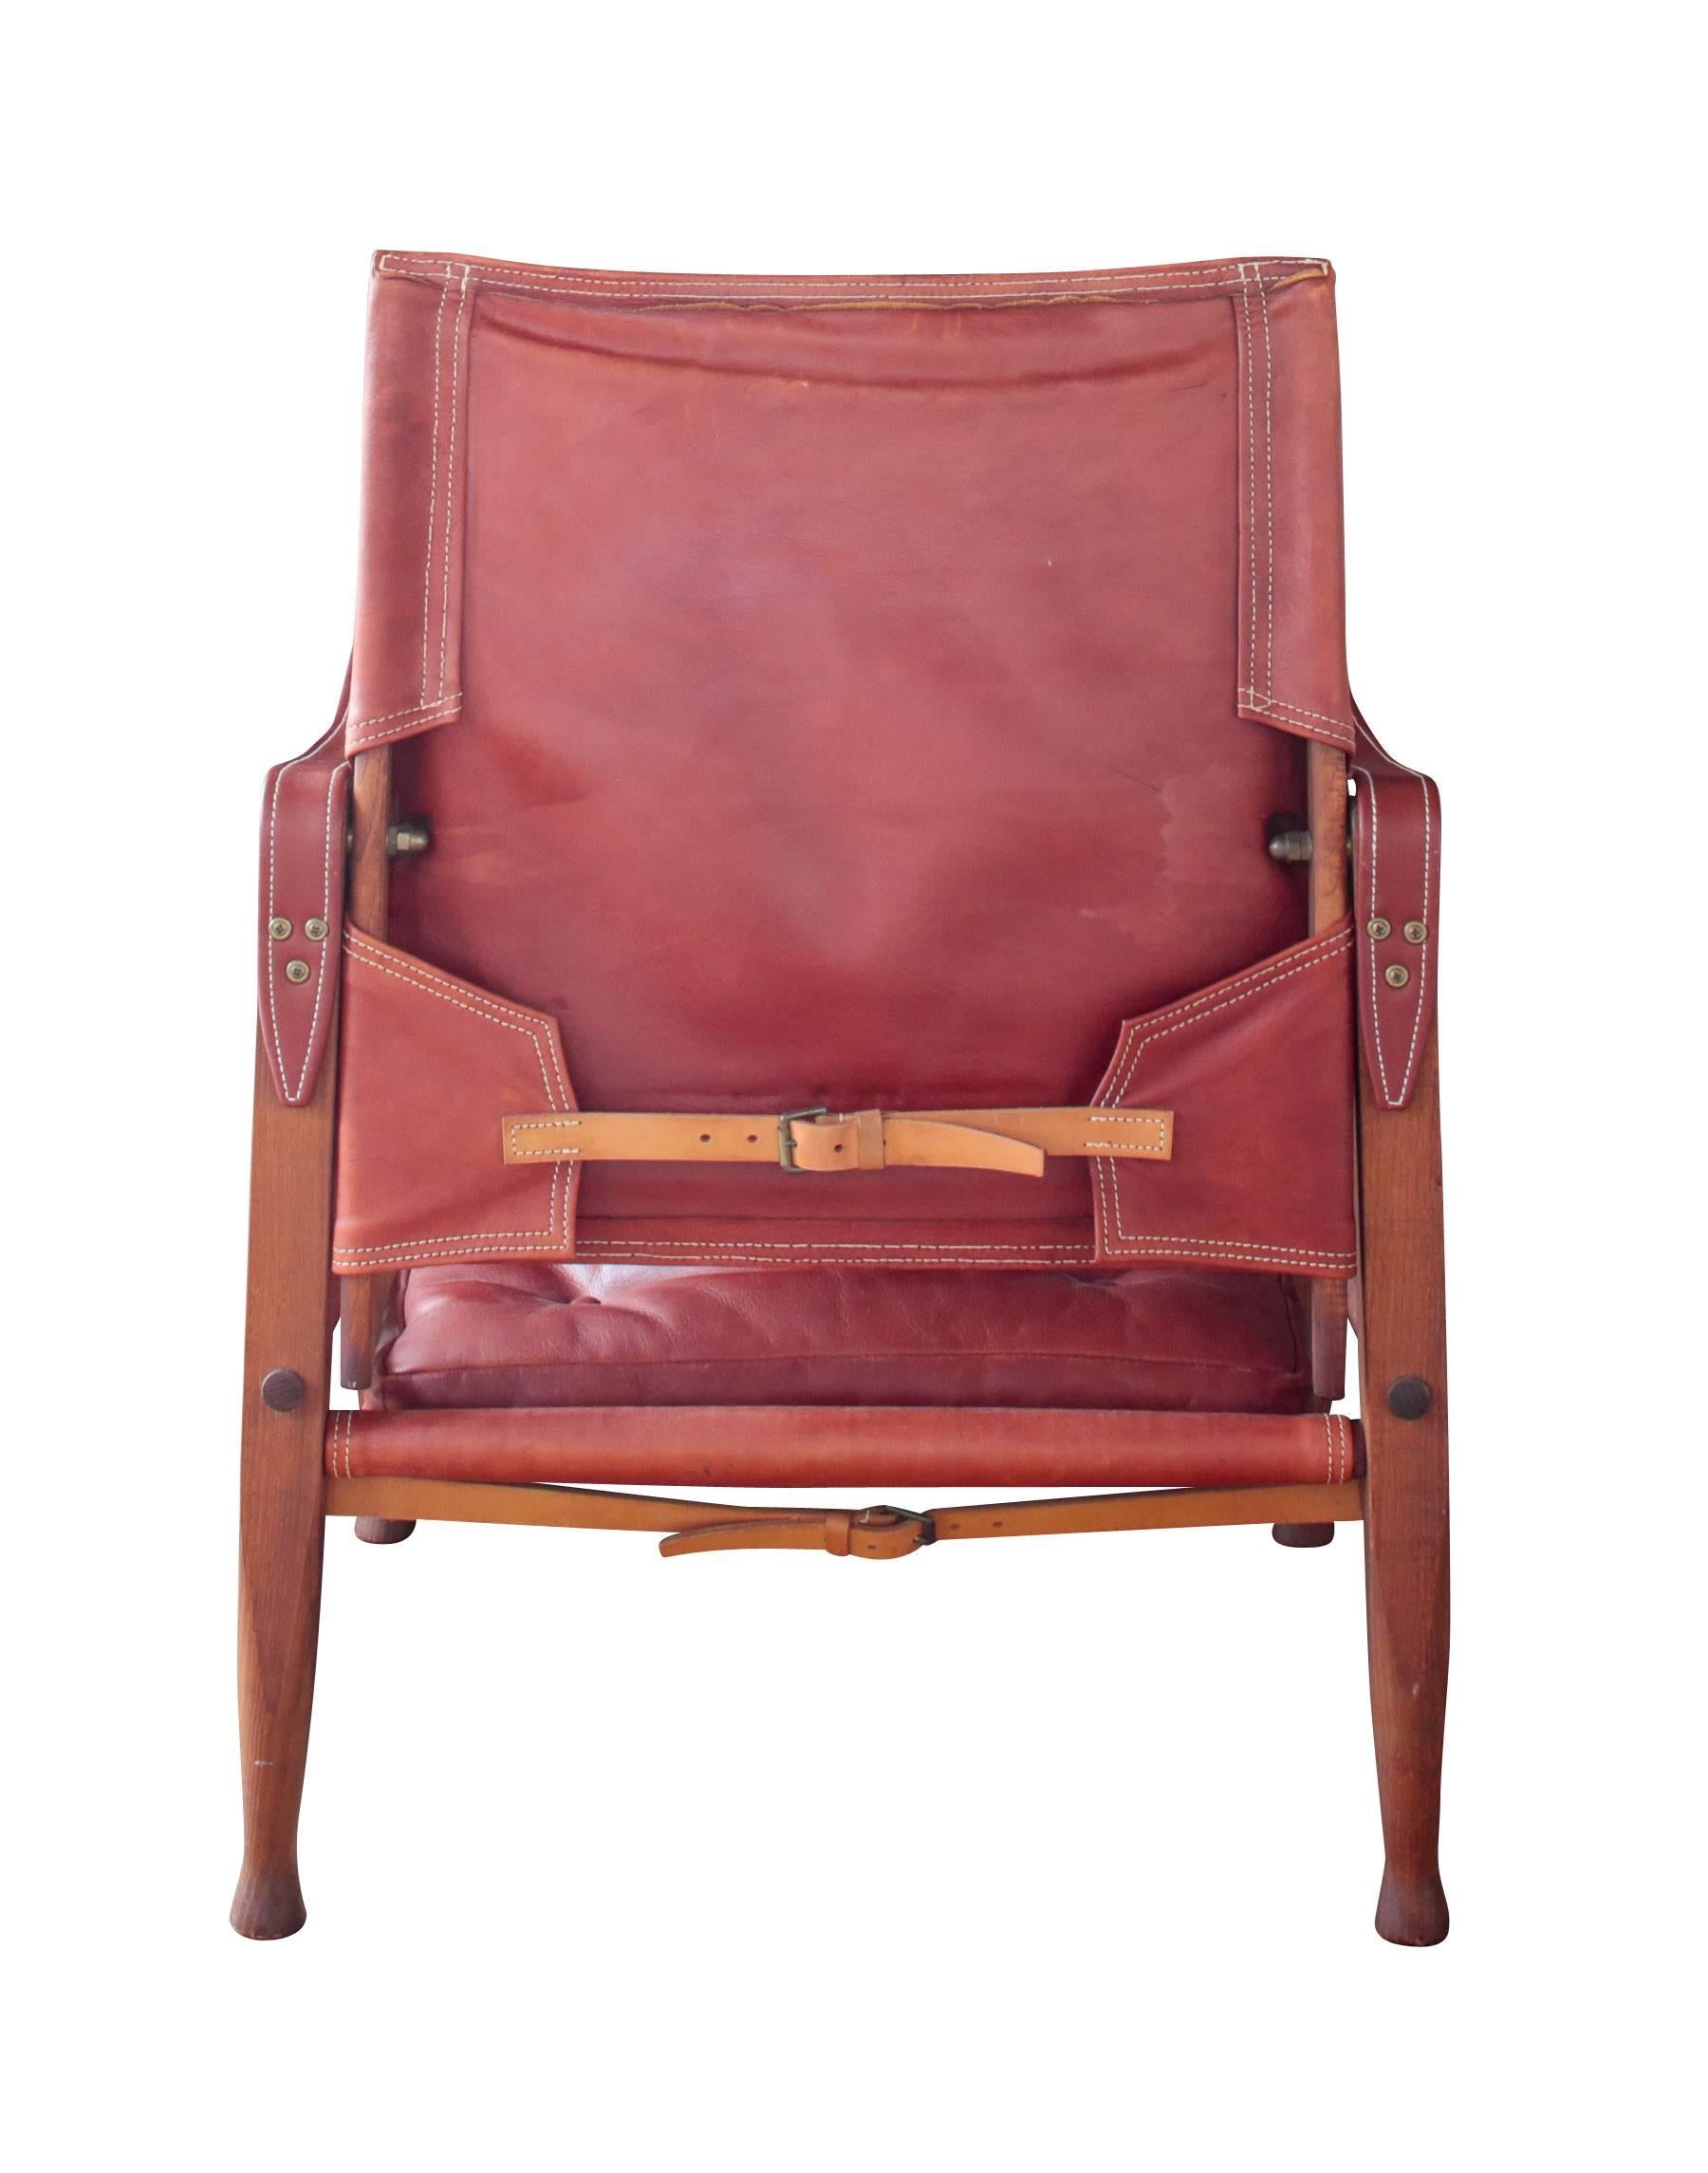 Danish Midcentury Safari Chairs by Kaare Klint in Oxblood Leather with Rosewood Frame